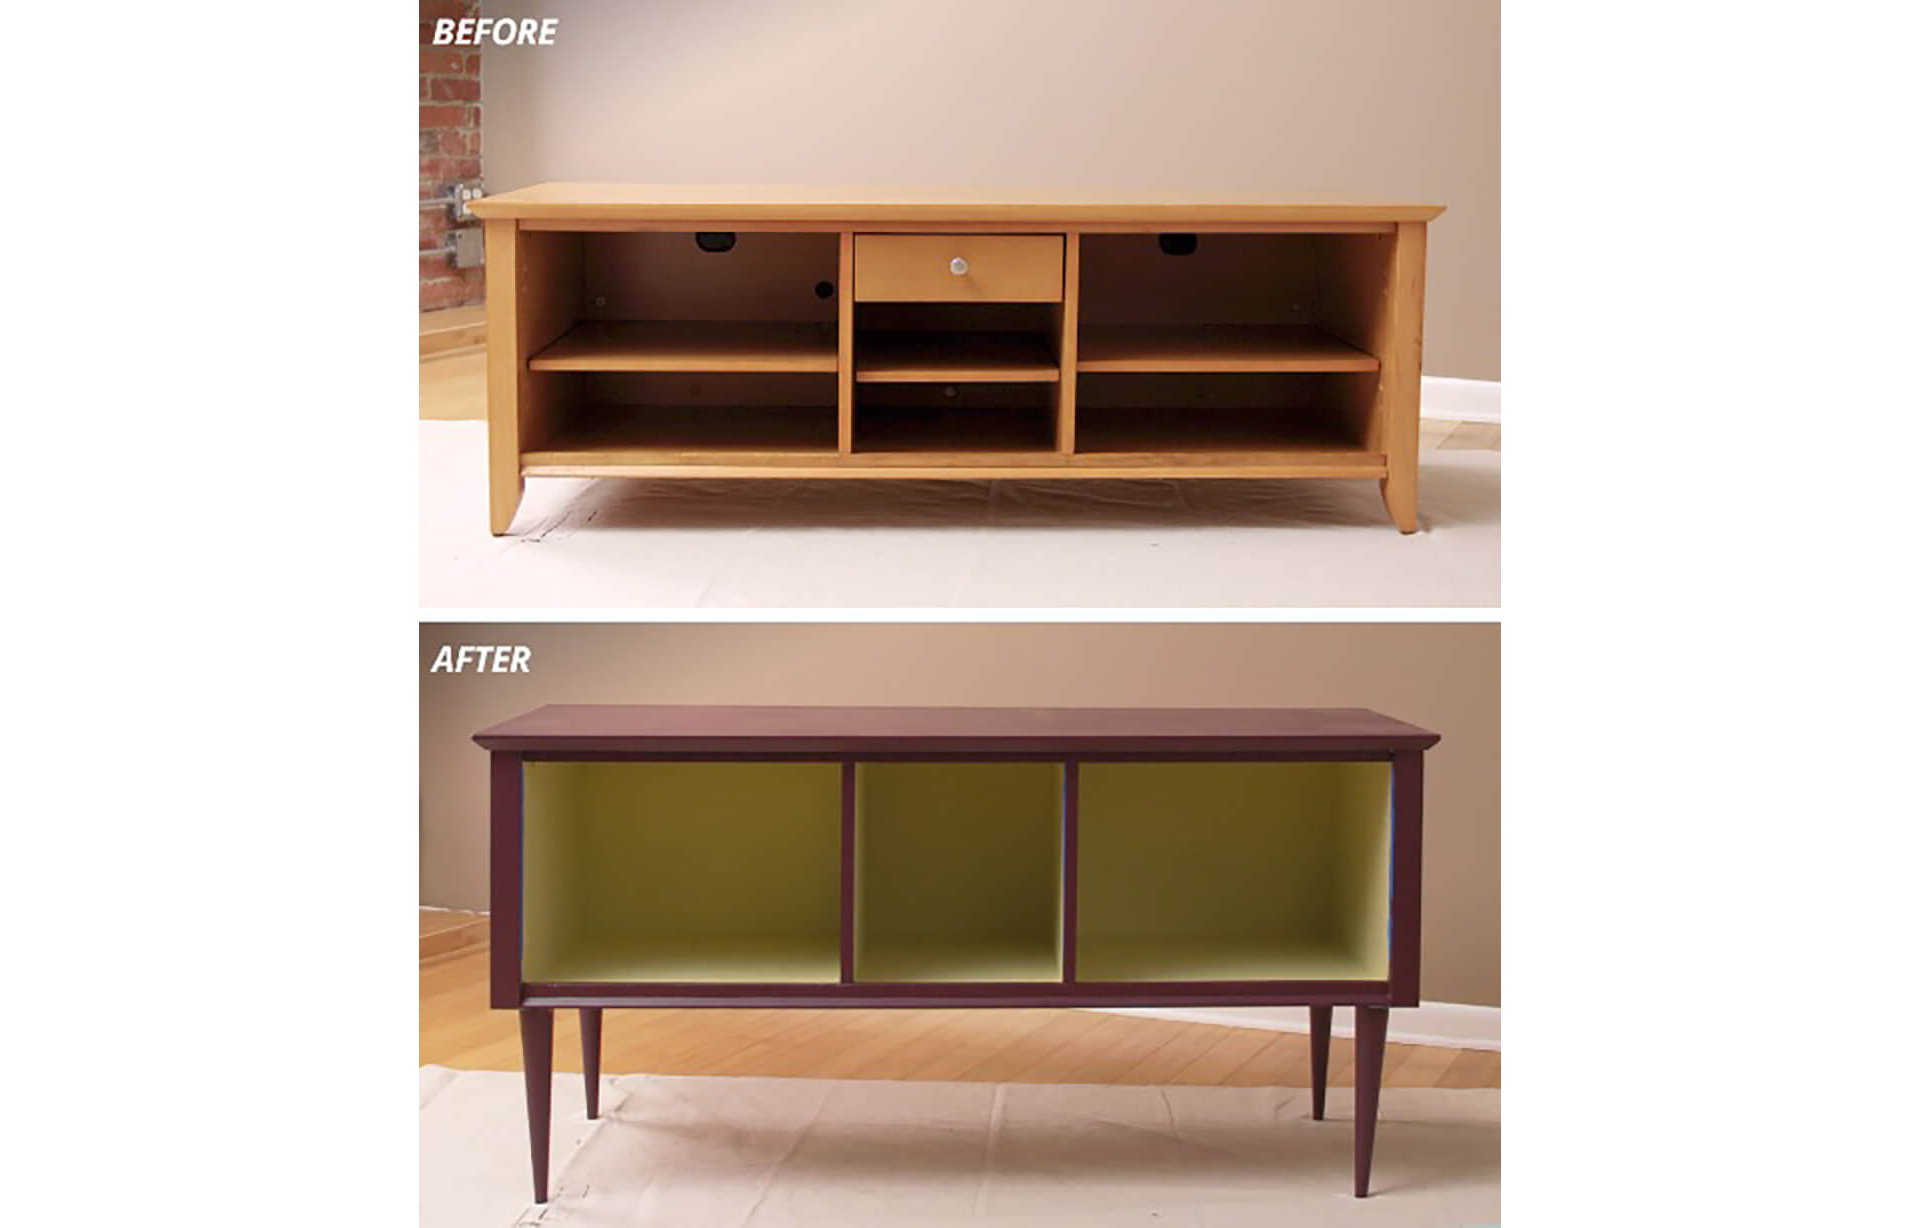 A before and after of a console table being painted.